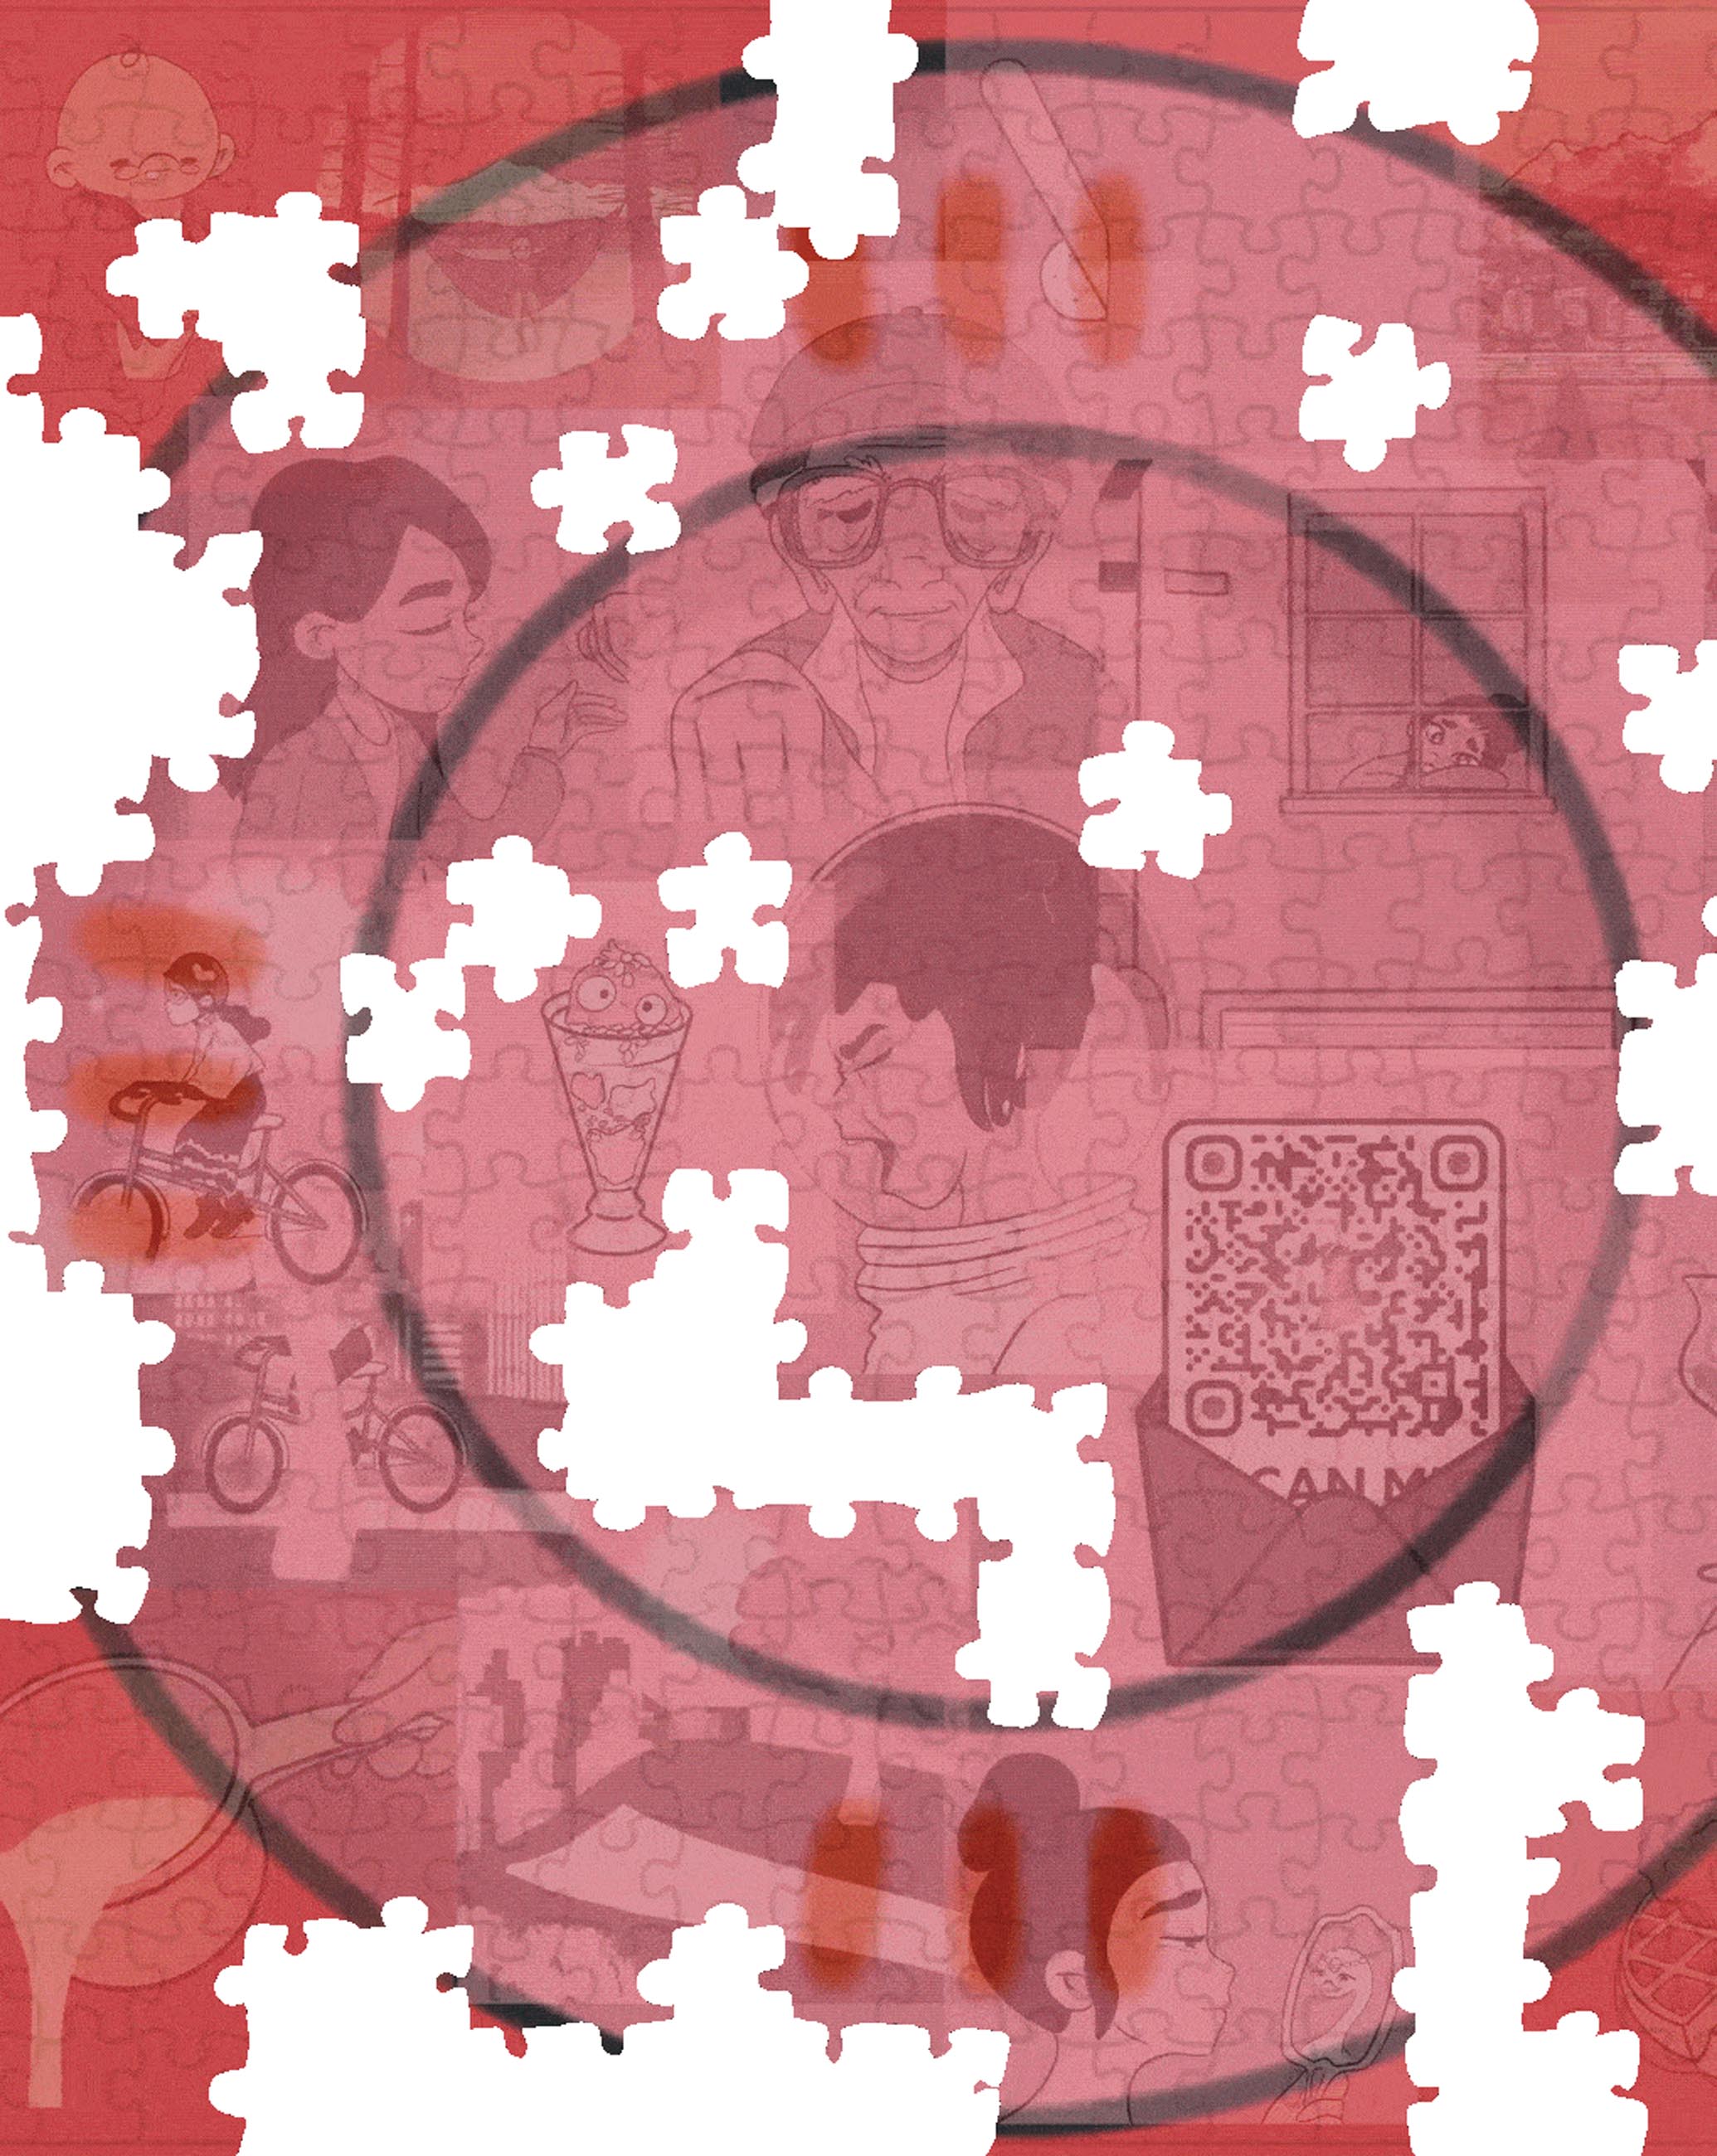 a puzzle missing pieces. It is transparent and rose colored with images of heads and other figures. Many pieces are missing and the voids are white.